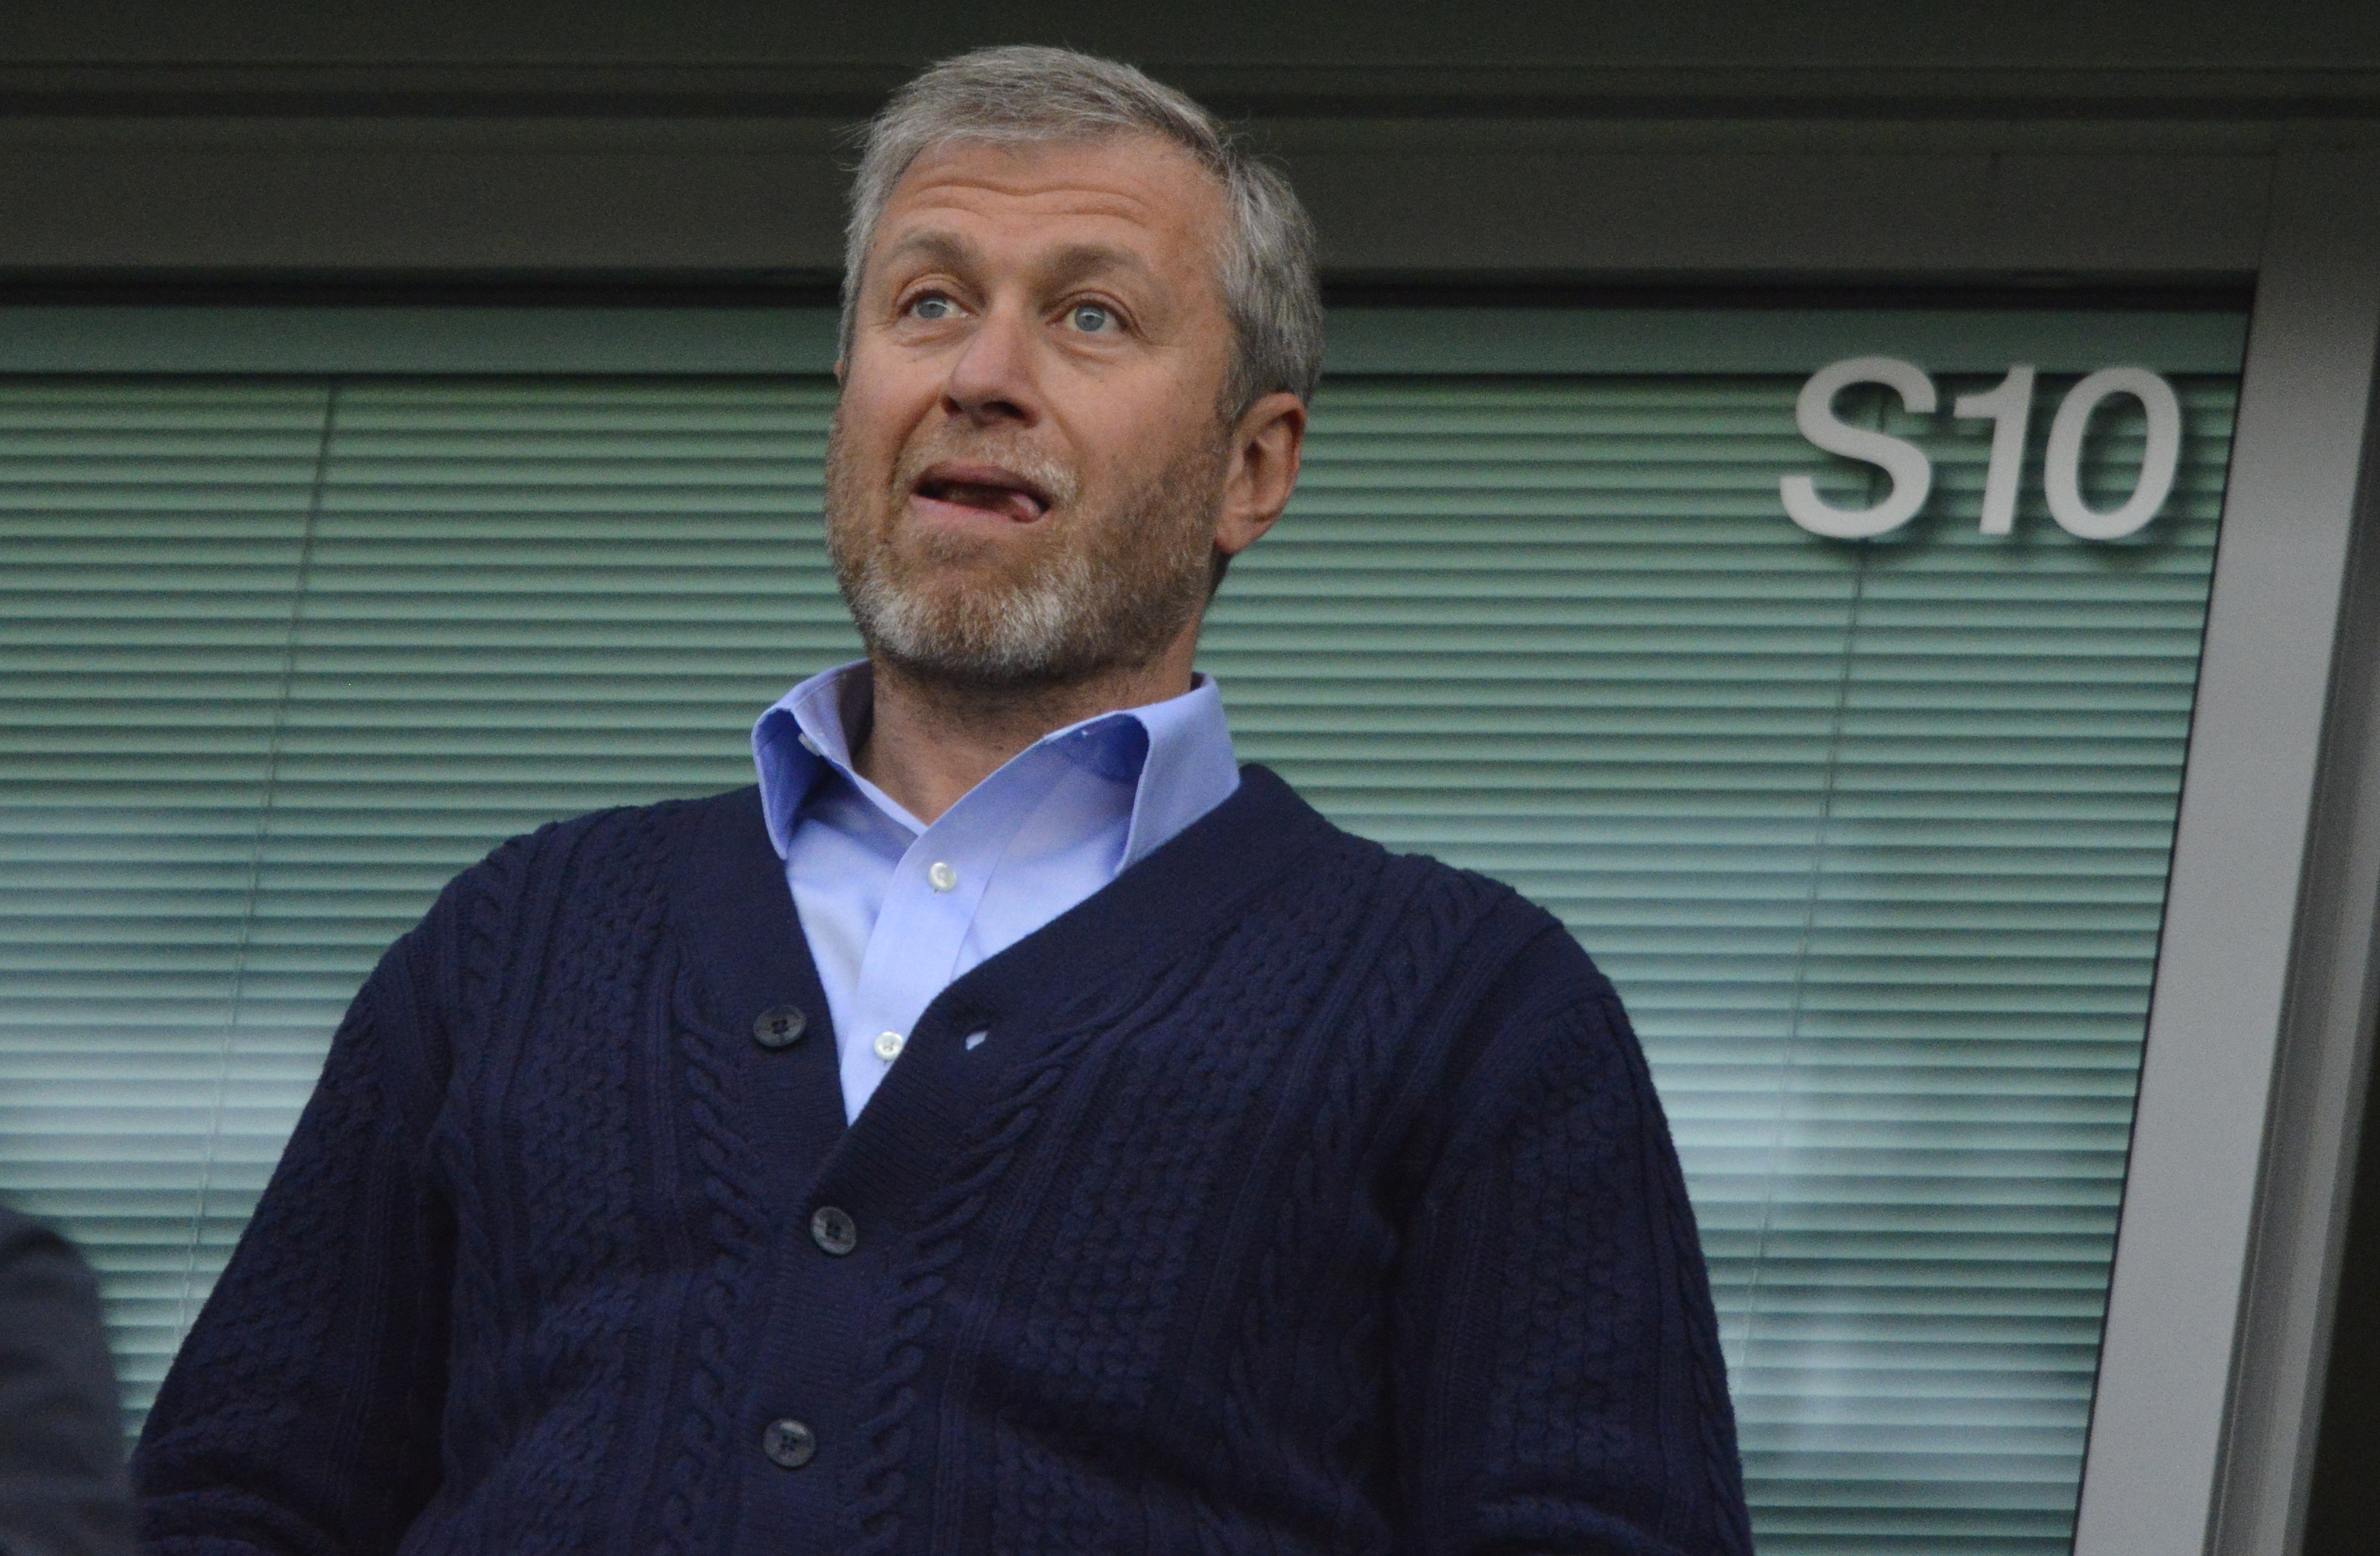 Chelsea owner Abramovich arrives for Champion's League semi-final second leg soccer match against Atletico Madrid in London